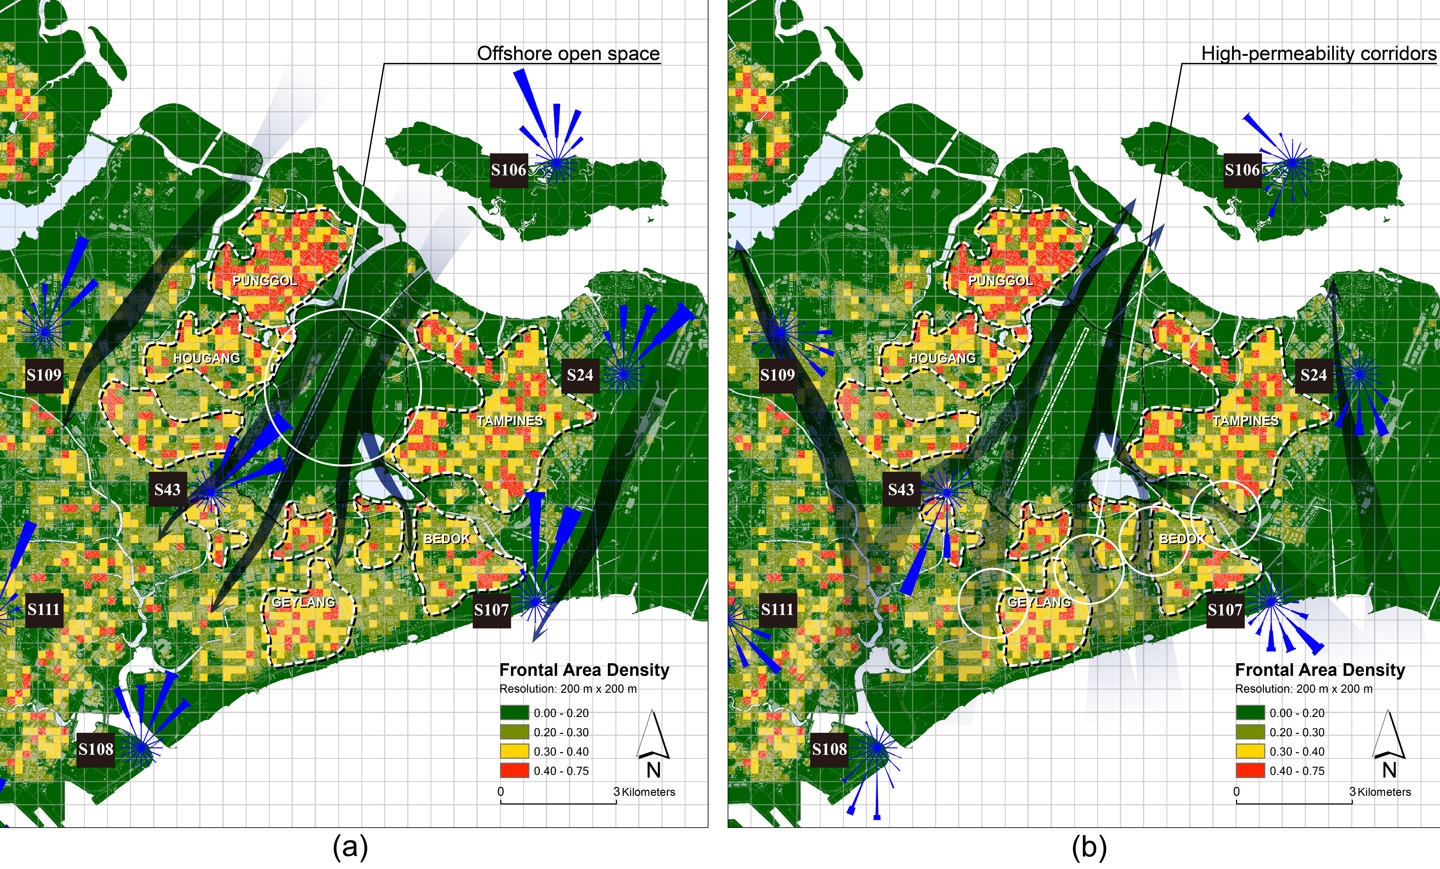 Figure 2. Potential and existing air paths identification in the Eastern part of Singapore [3].